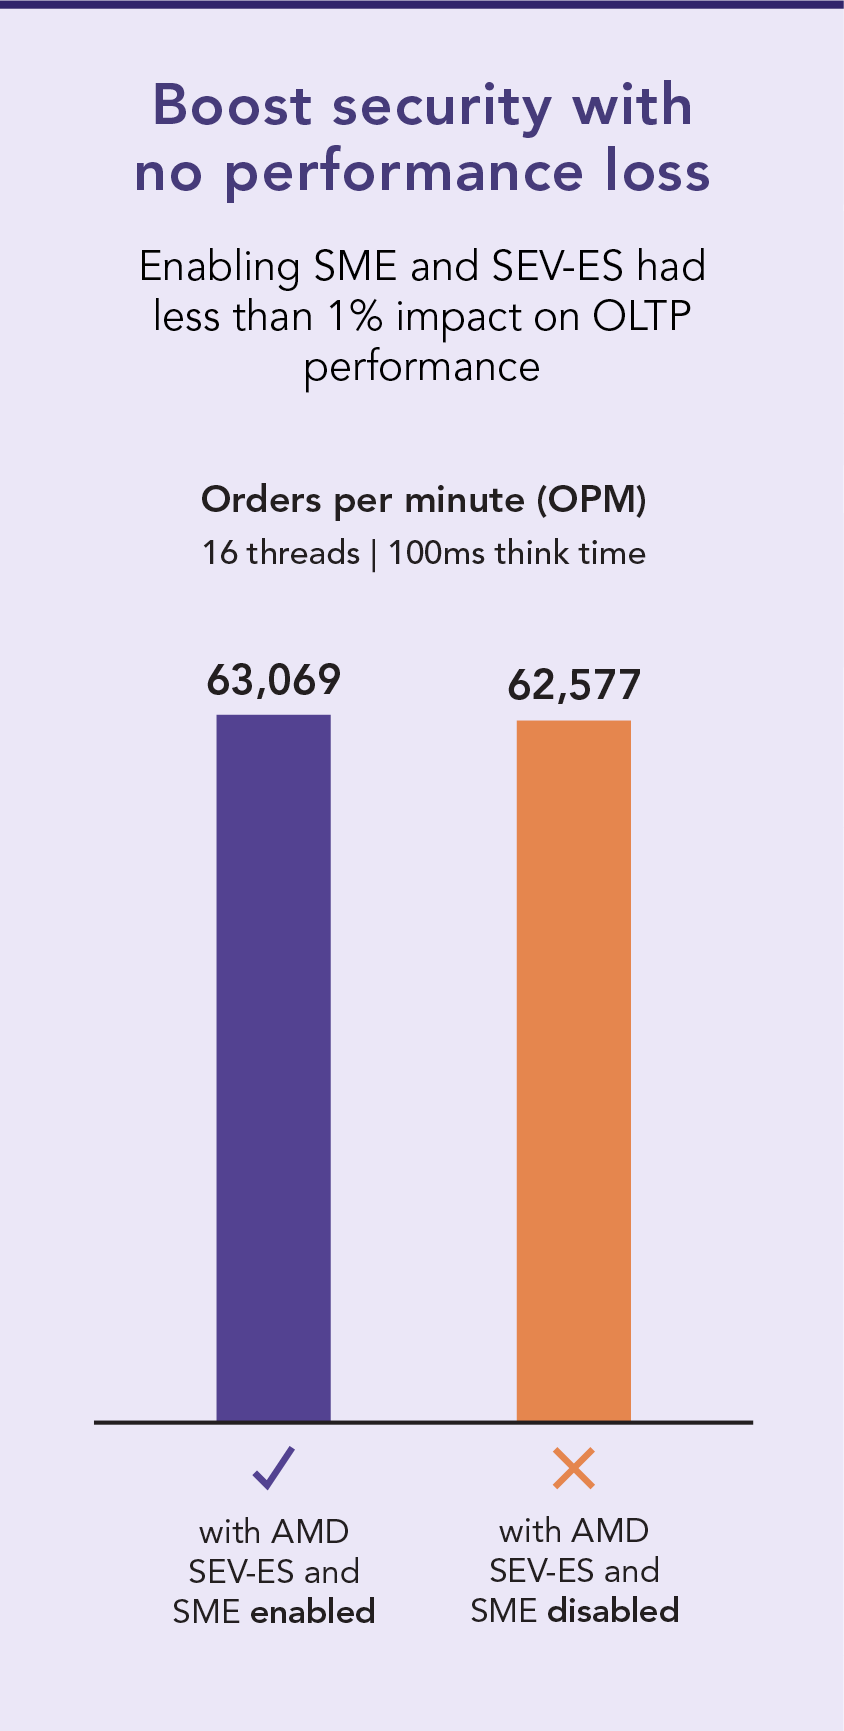 Boost security with no performance loss. Enabling SME and SEV ES had less than 1 percent impact on OLTP performance. Figure 1: Average number of orders per minute the environment processed during the DVD Store 3 benchmark workload, using settings of 16 threads and 100ms think time. Higher is better. The configuration with AMD SEV-ES and SME enabled supported 63,069 orders per minute. The configuration with AMD SEV ES and SME disabled supported 62,577 orders per minute.